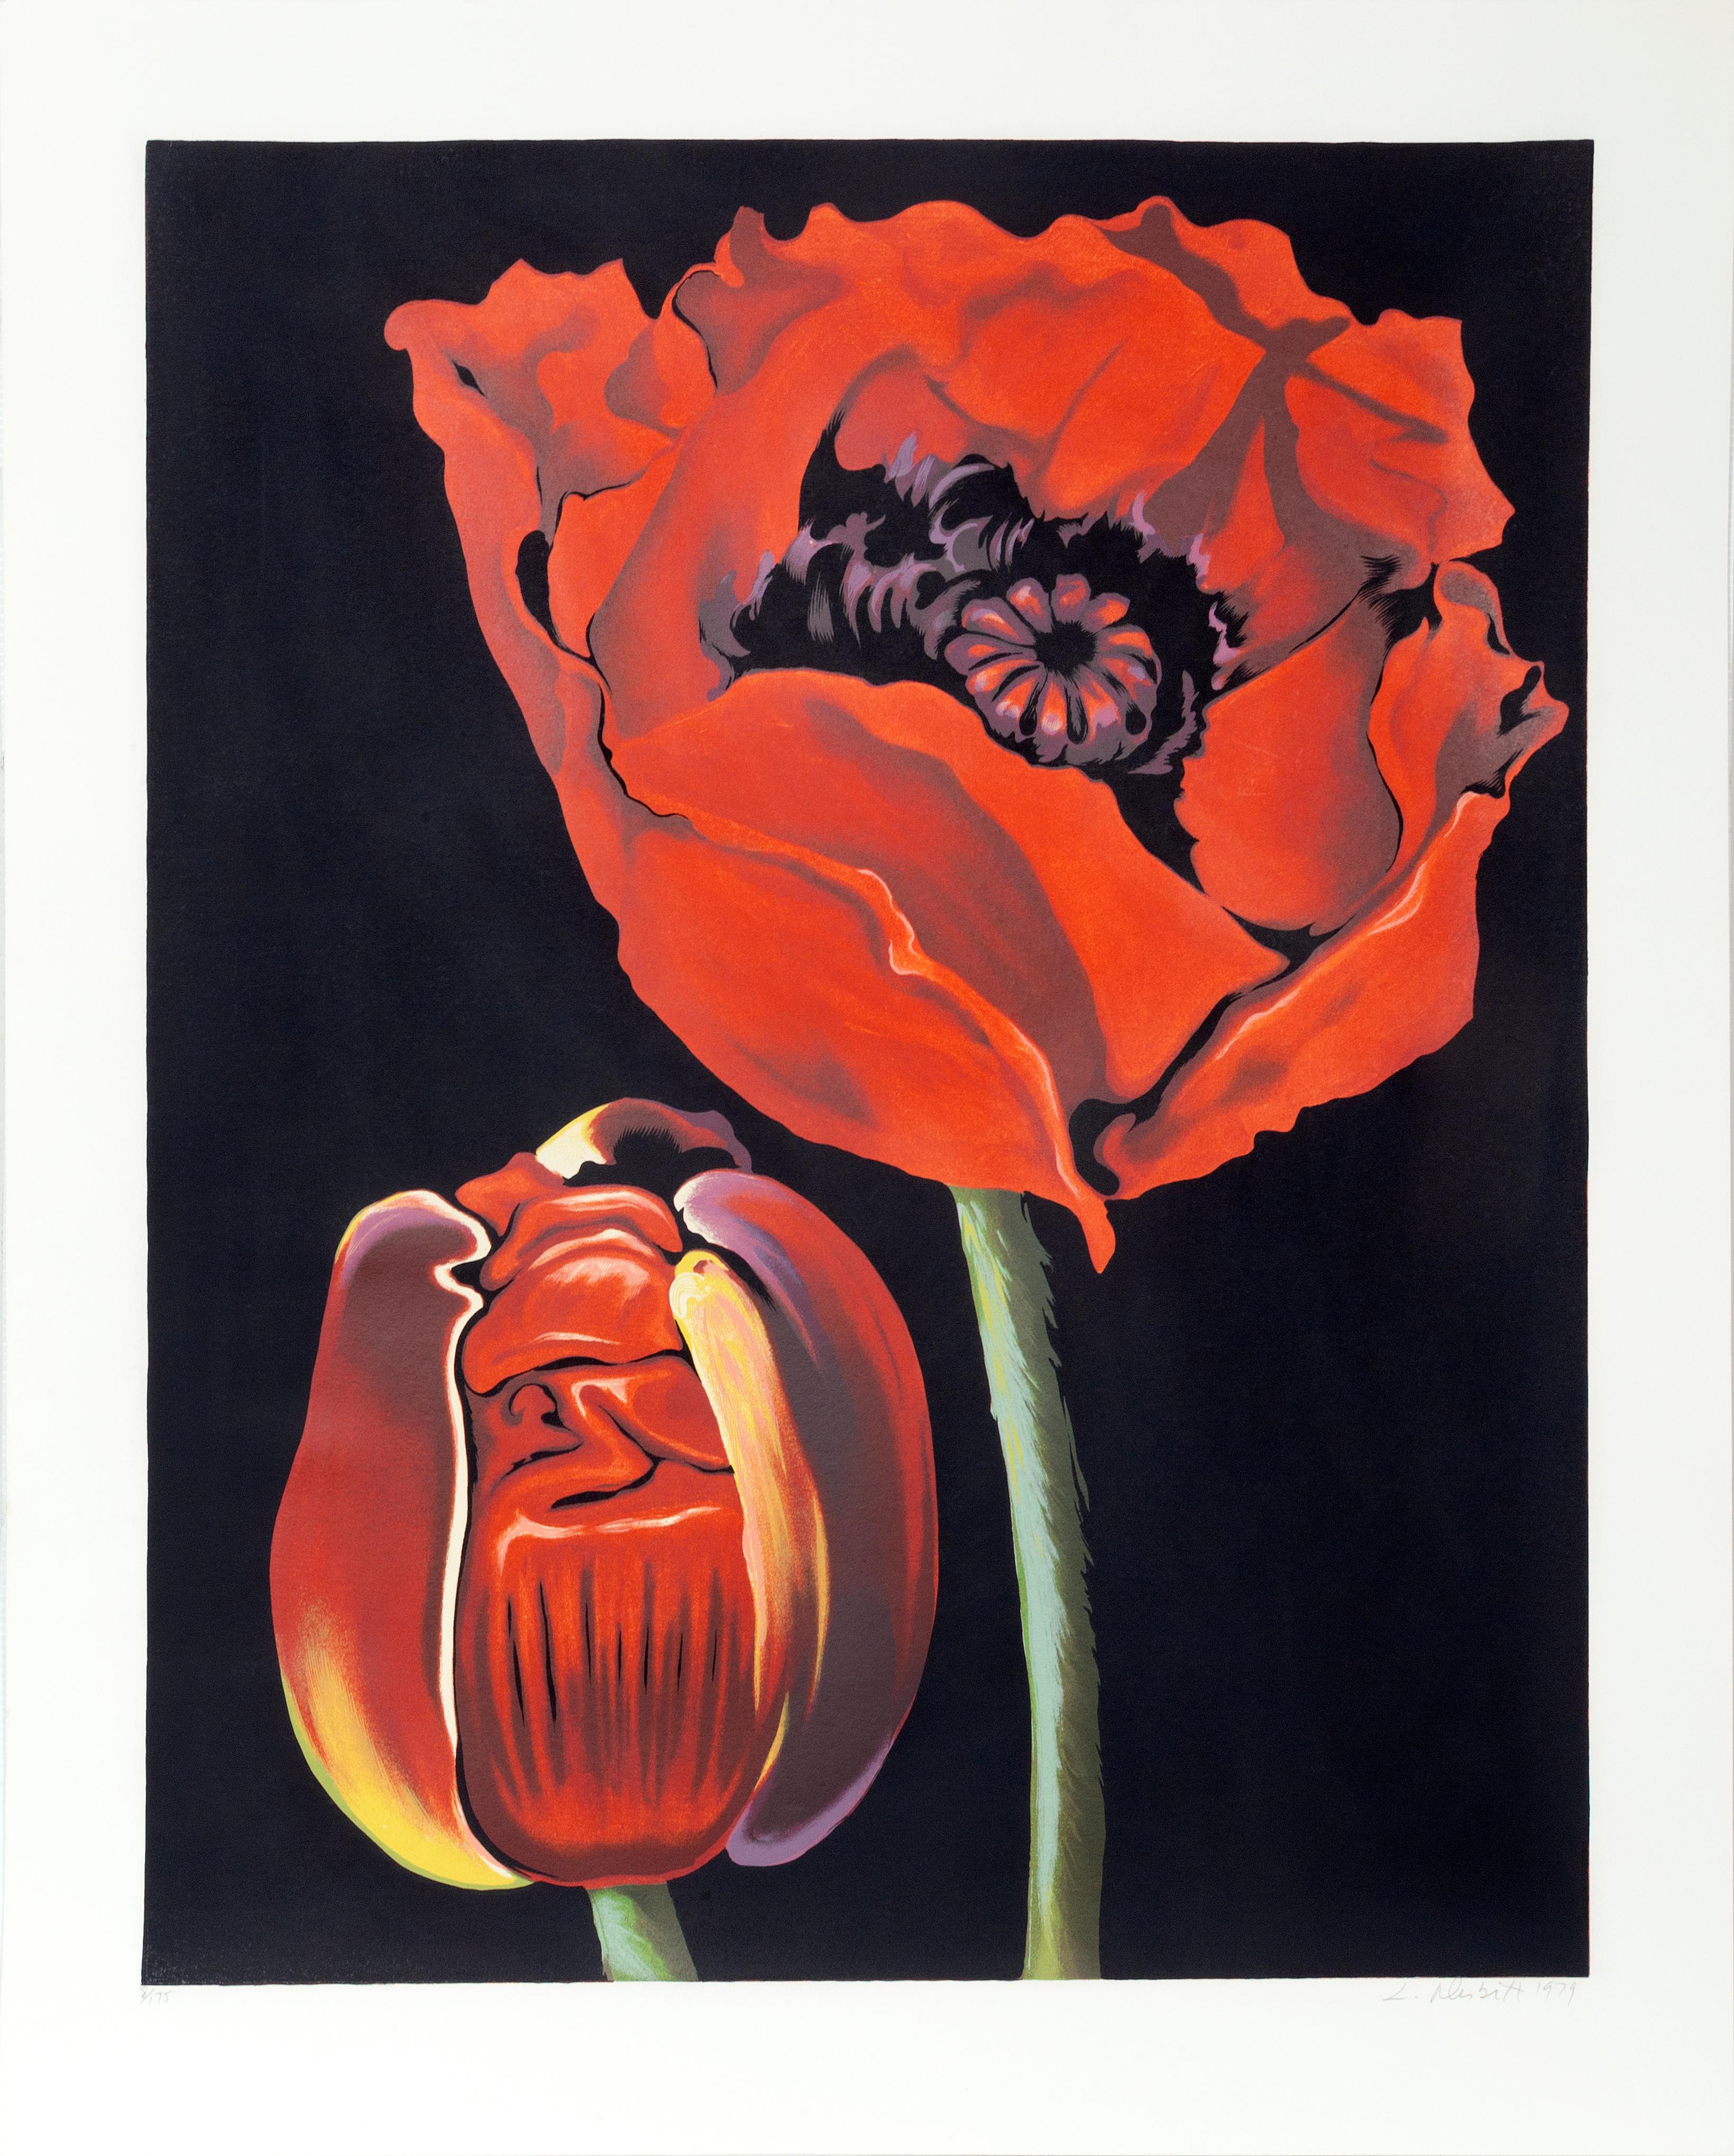 Artist: Lowell Nesbitt, American (1933 - 1993)
Title: Red Poppies
Year: 1979
Medium: Serigraph, signed and numbered in pencil
Edition: 8/175
Paper Size: 44.5 x 35.5 inches